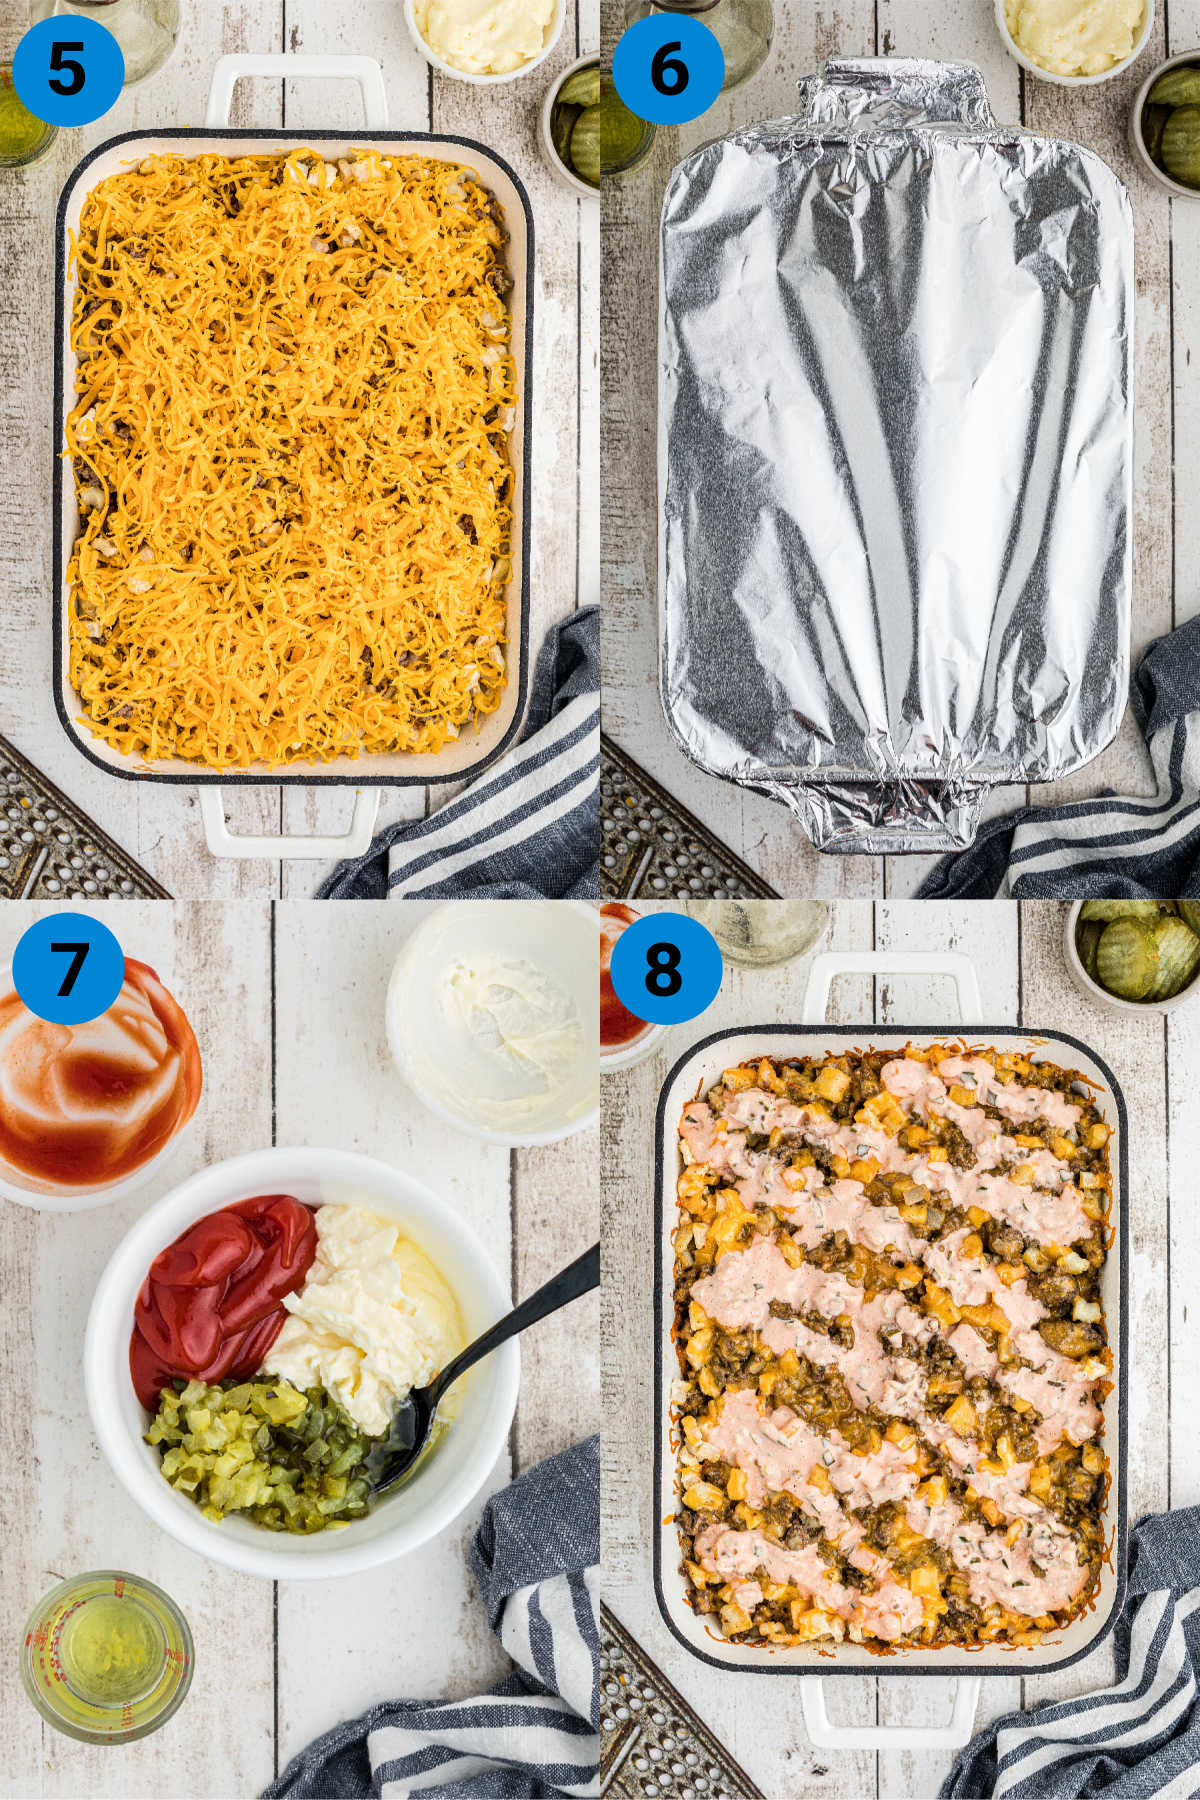 A collage of four images (steps 5-8) showing how to make a big mac casserole.